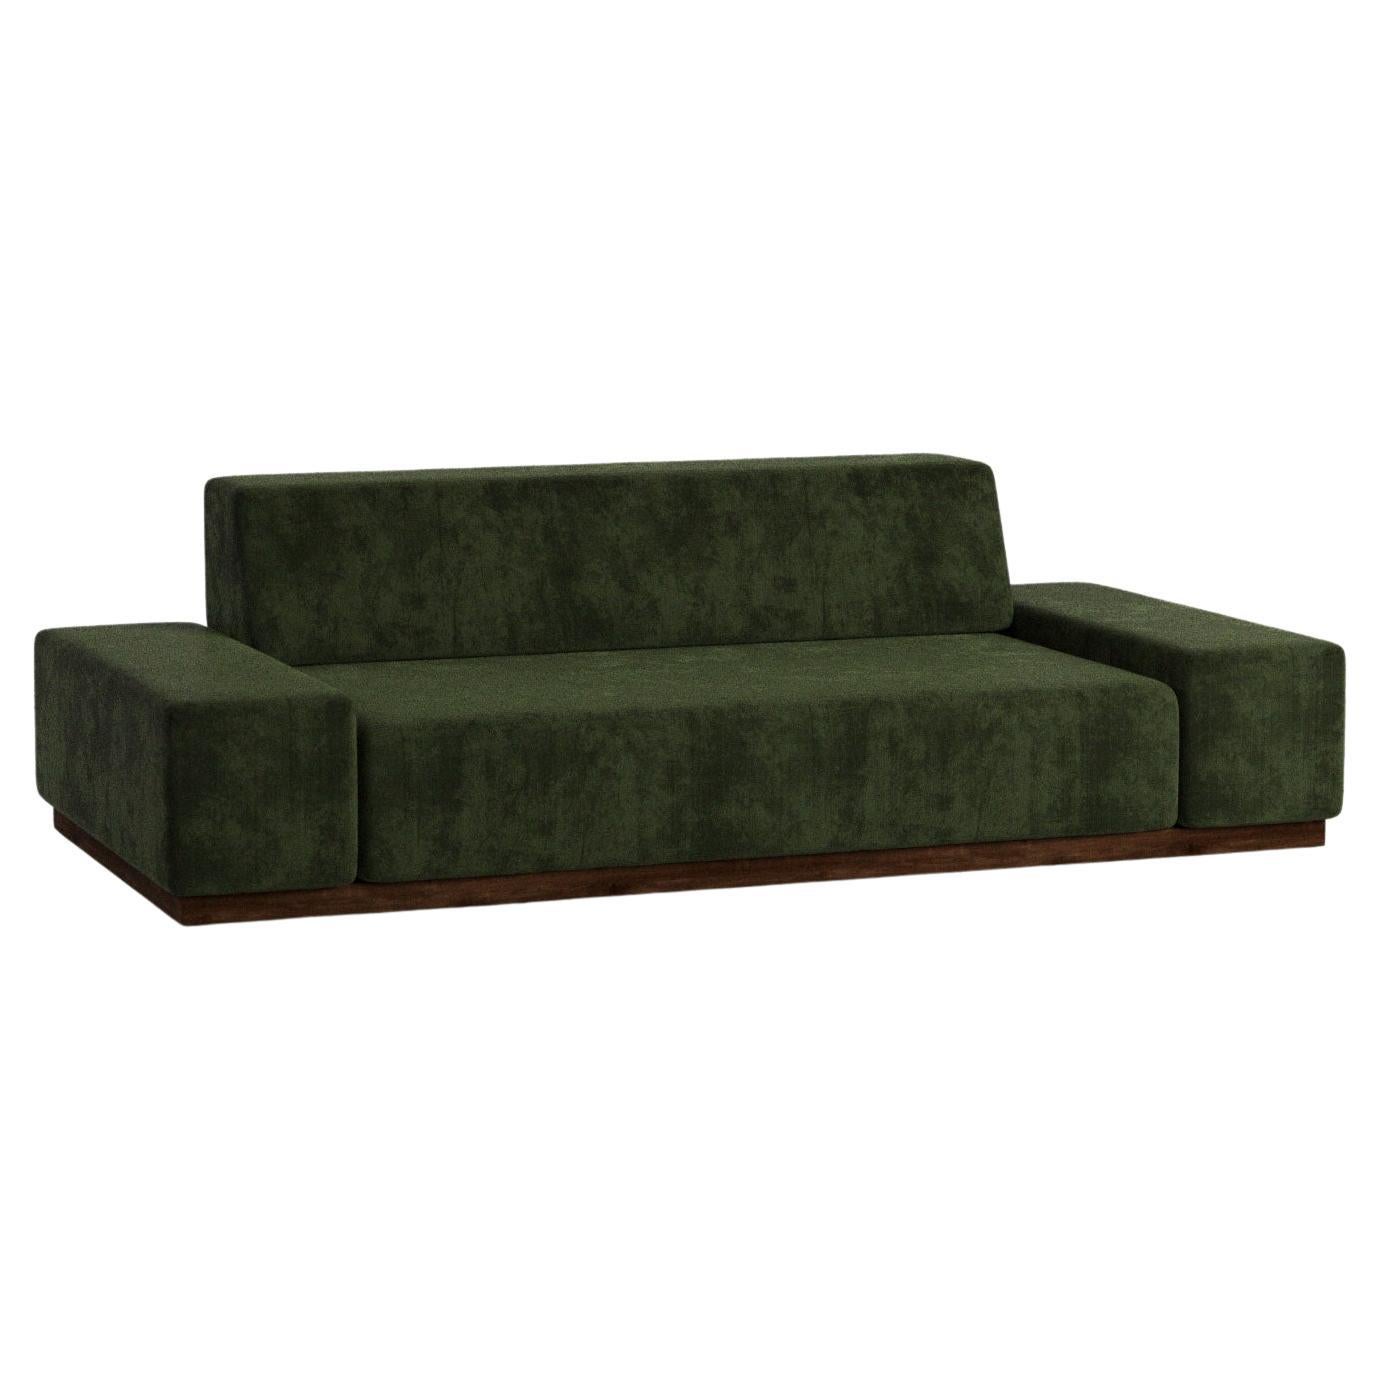 Olive Two Seater Nube Sofa by Siete Studio